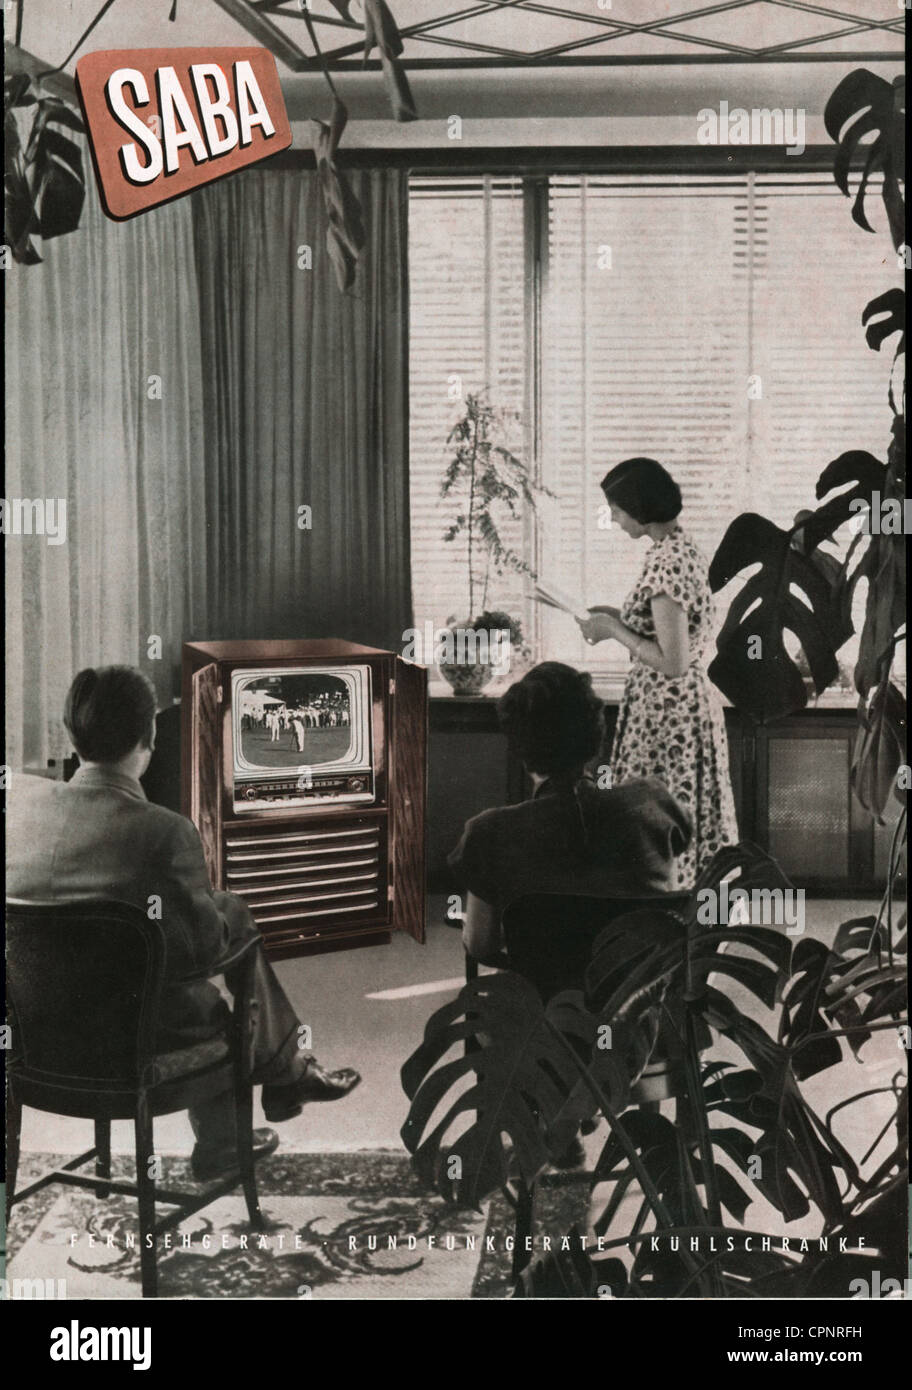 broadcast,television,prospectus,advertising for Saba television set,viewers watching television in the living-room,illustrated: Saba Schauinsland S 44,standalone device with 43 centimeter screen size,standalone device with closeable blinds,original price 1954: DM 1.198,Germany,1954,monochrome,exotic woods,television viewer,television viewers,gum-tree,gum-trees,TV history,economic miracle,economic miracles,50s,prospectus,catalogue,watching,watch,living-room,sitting-room,livingroom,living-rooms,sitting-rooms,livingrooms,television s,Additional-Rights-Clearences-Not Available Stock Photo